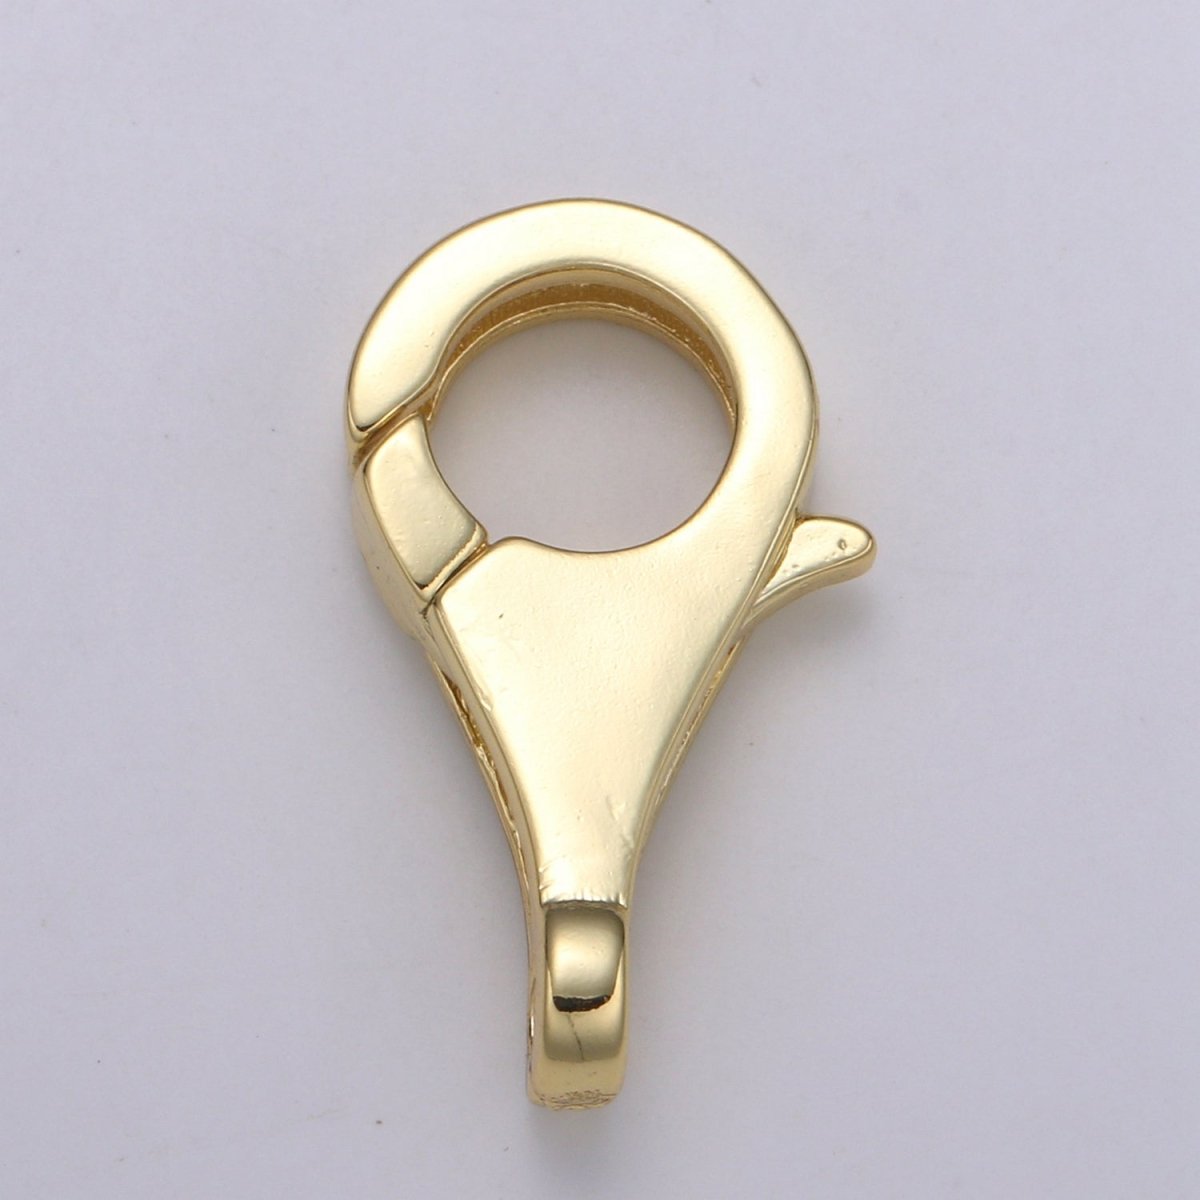 Wholesale Lobster Clasp 24k Gold , Slender Lobster Claw for Jewelry Making, Size 20.1mmX11.1mm L-179 - DLUXCA